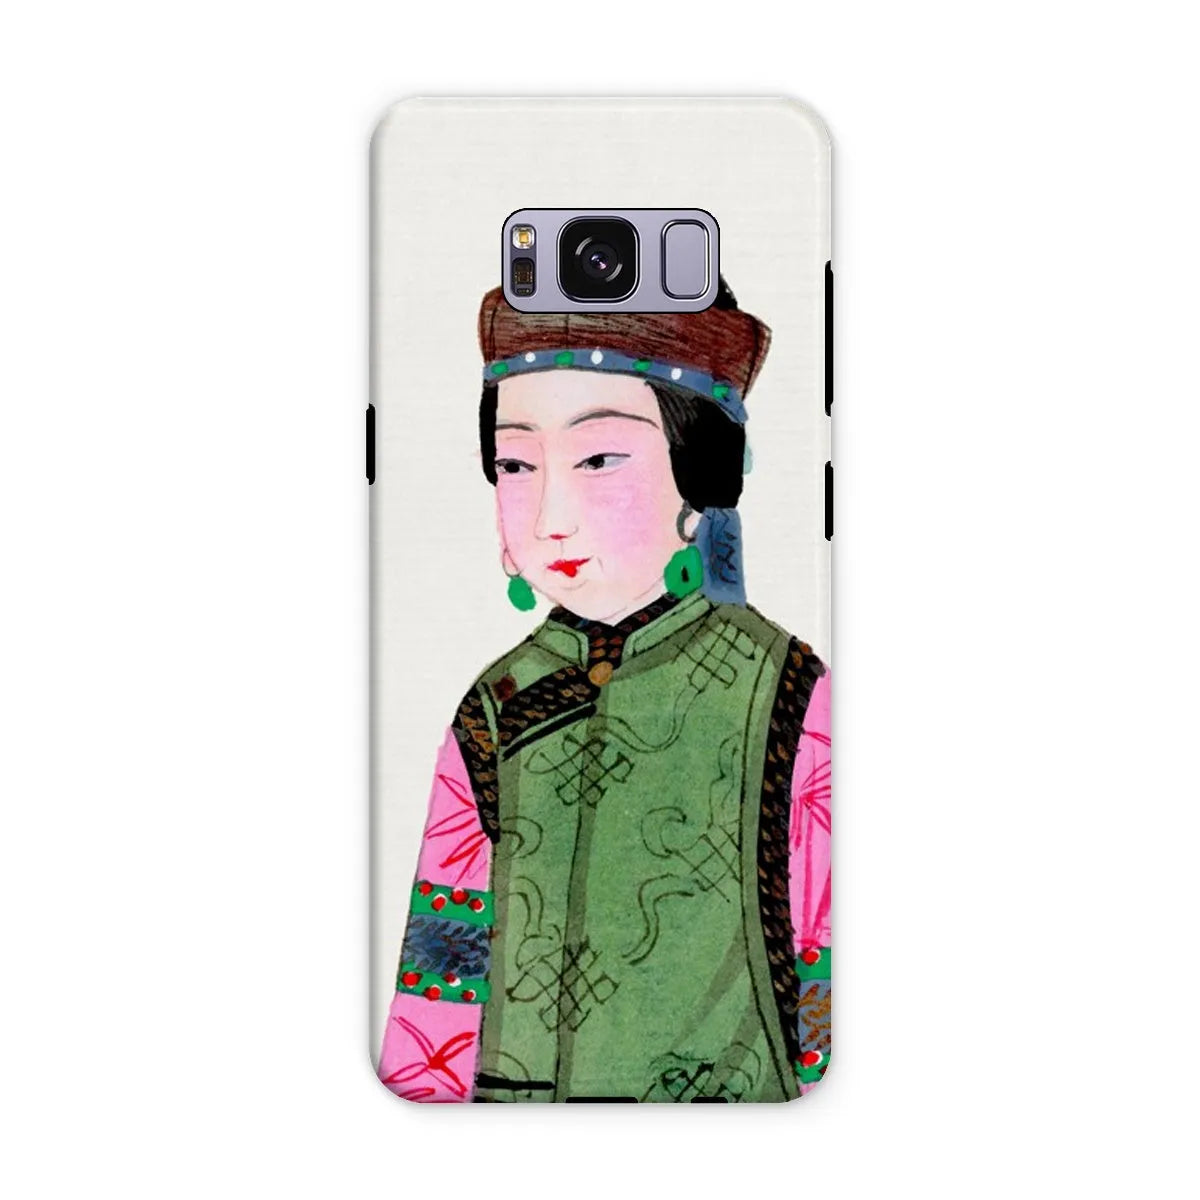 Noblewoman In Winter - Chinese Aesthetic Art Phone Case - Samsung Galaxy S8 Plus / Matte - Mobile Phone Cases